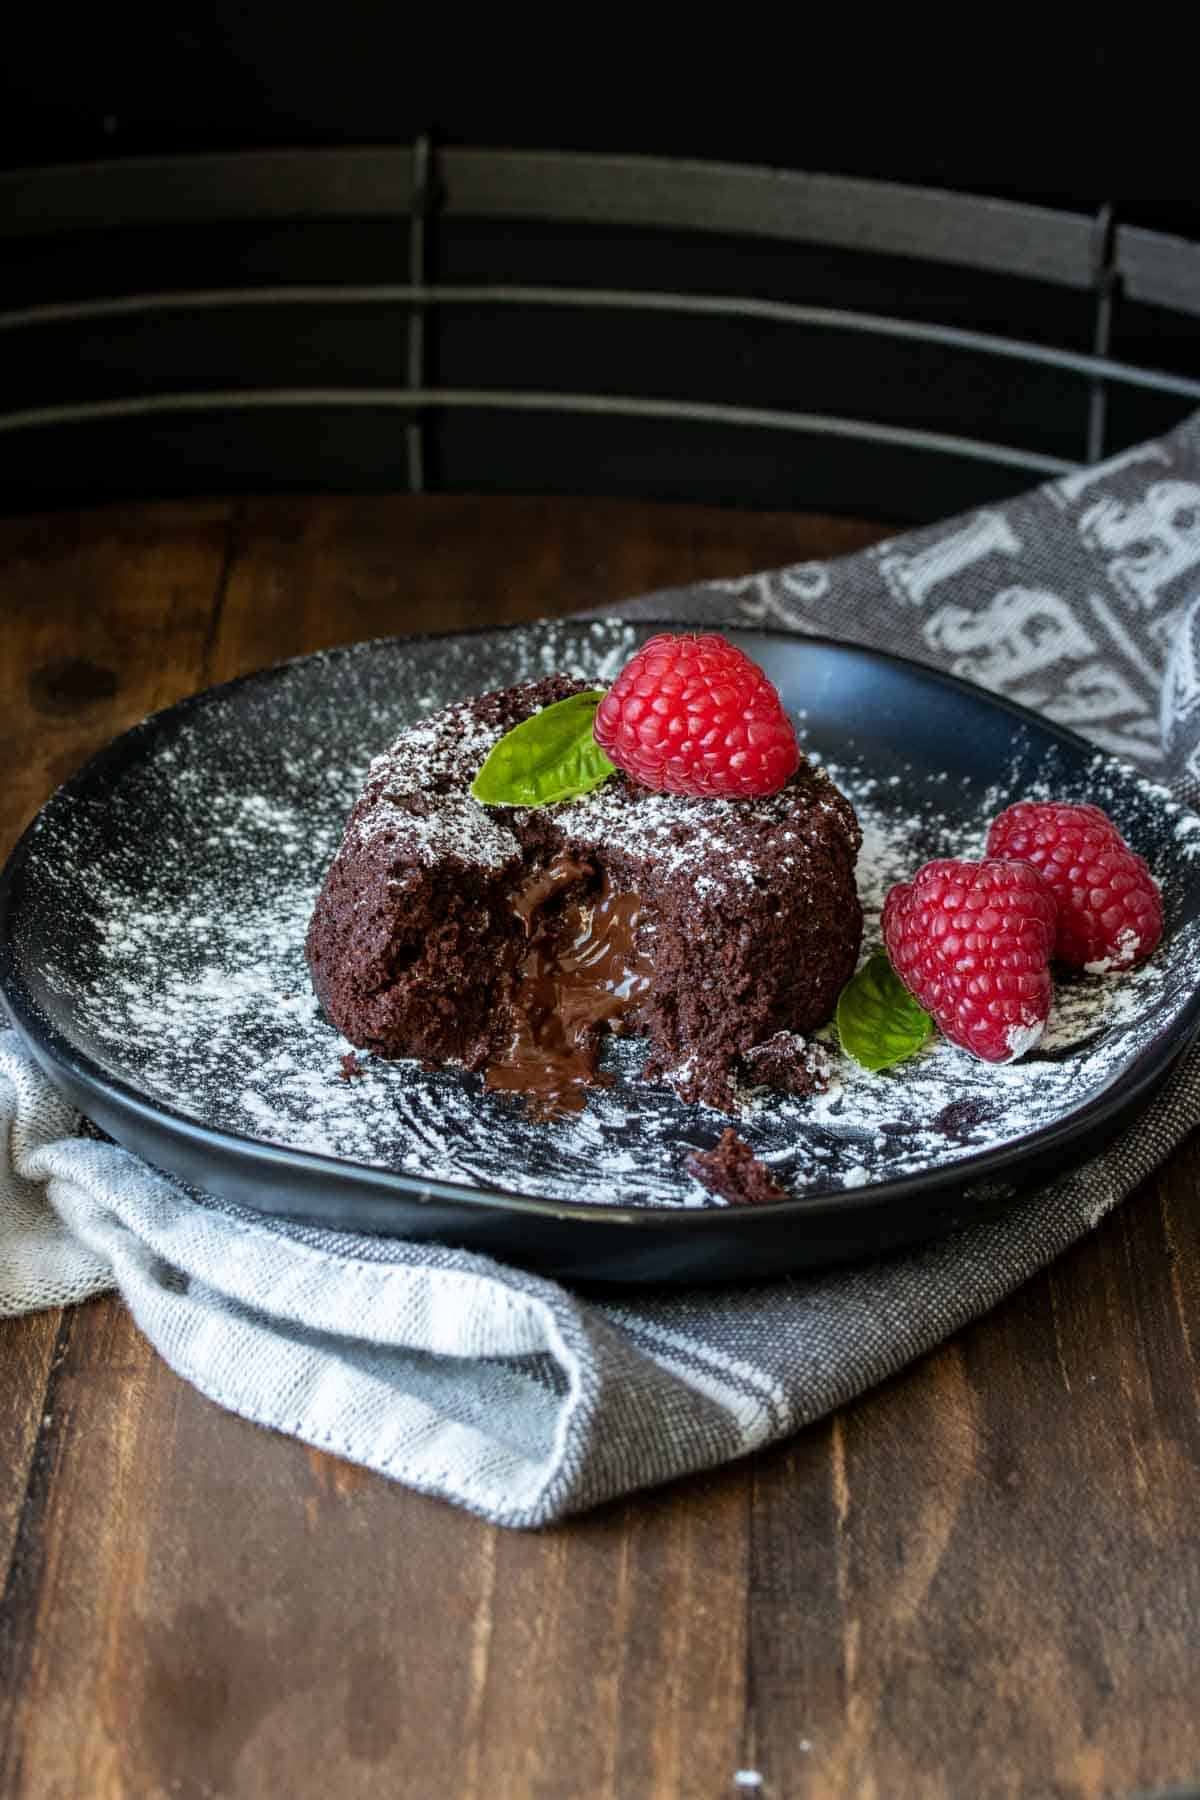 Cut open chocolate lava cake on a black plate with raspberries.